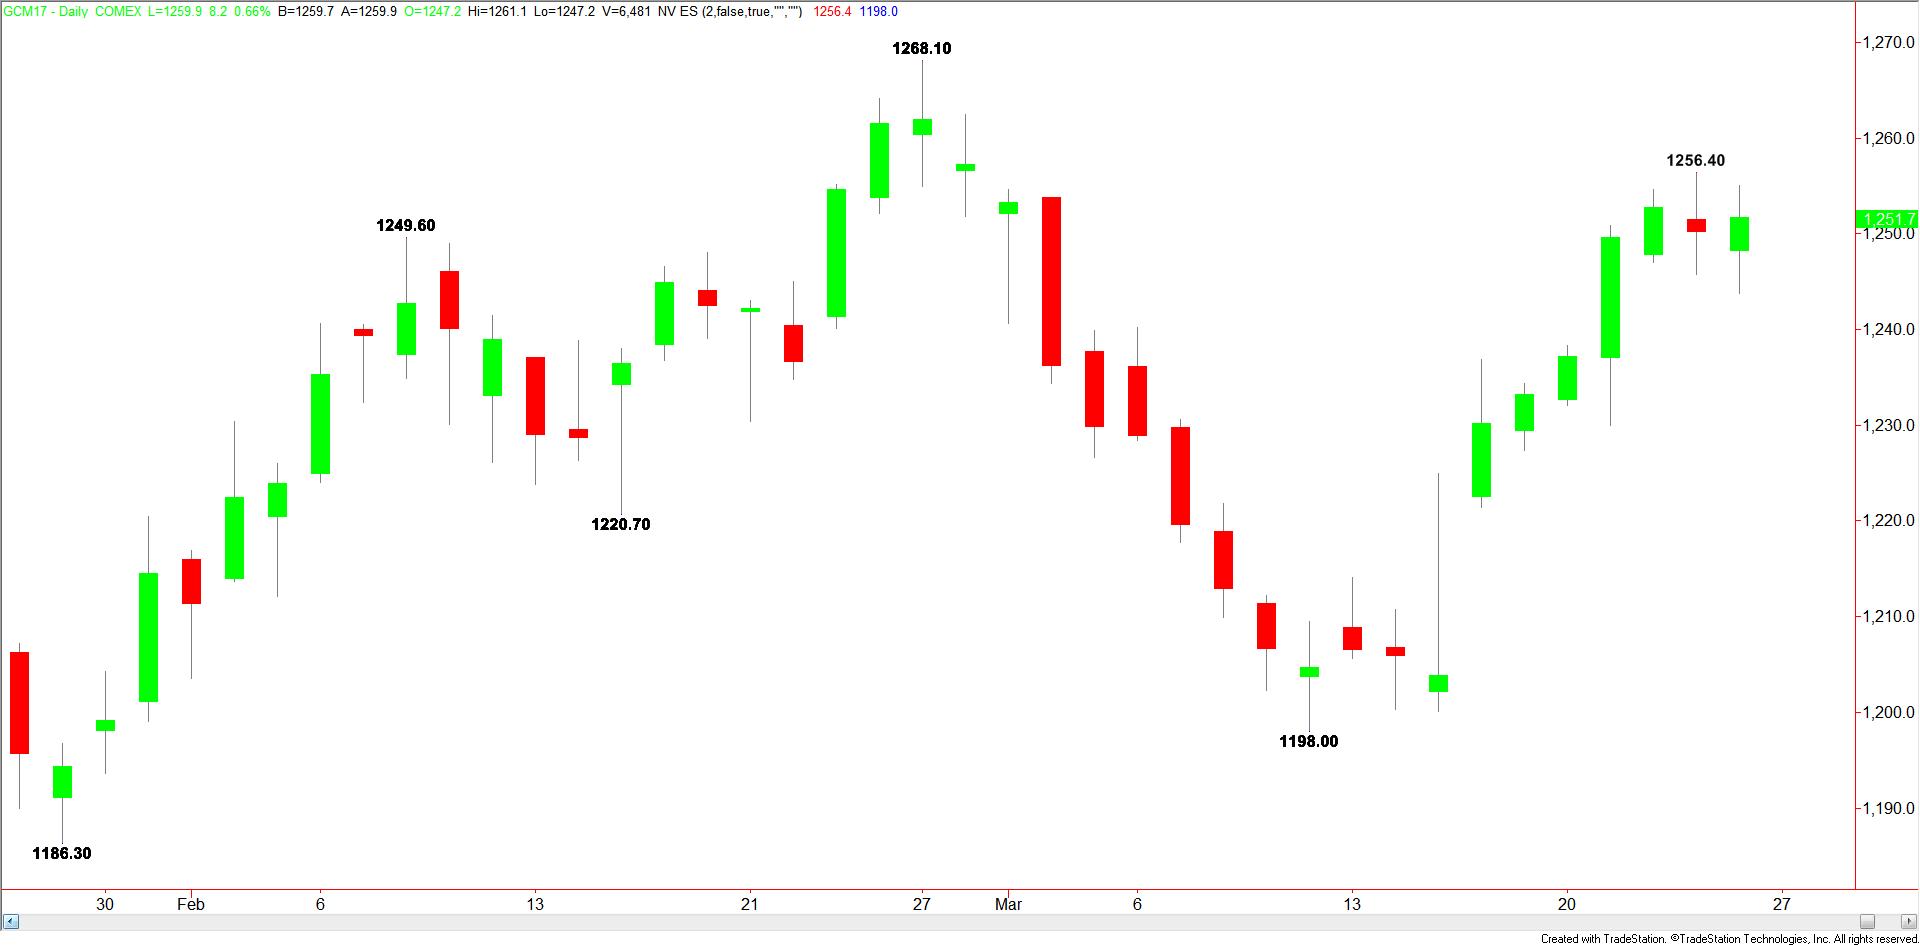 Daily Comex Gold